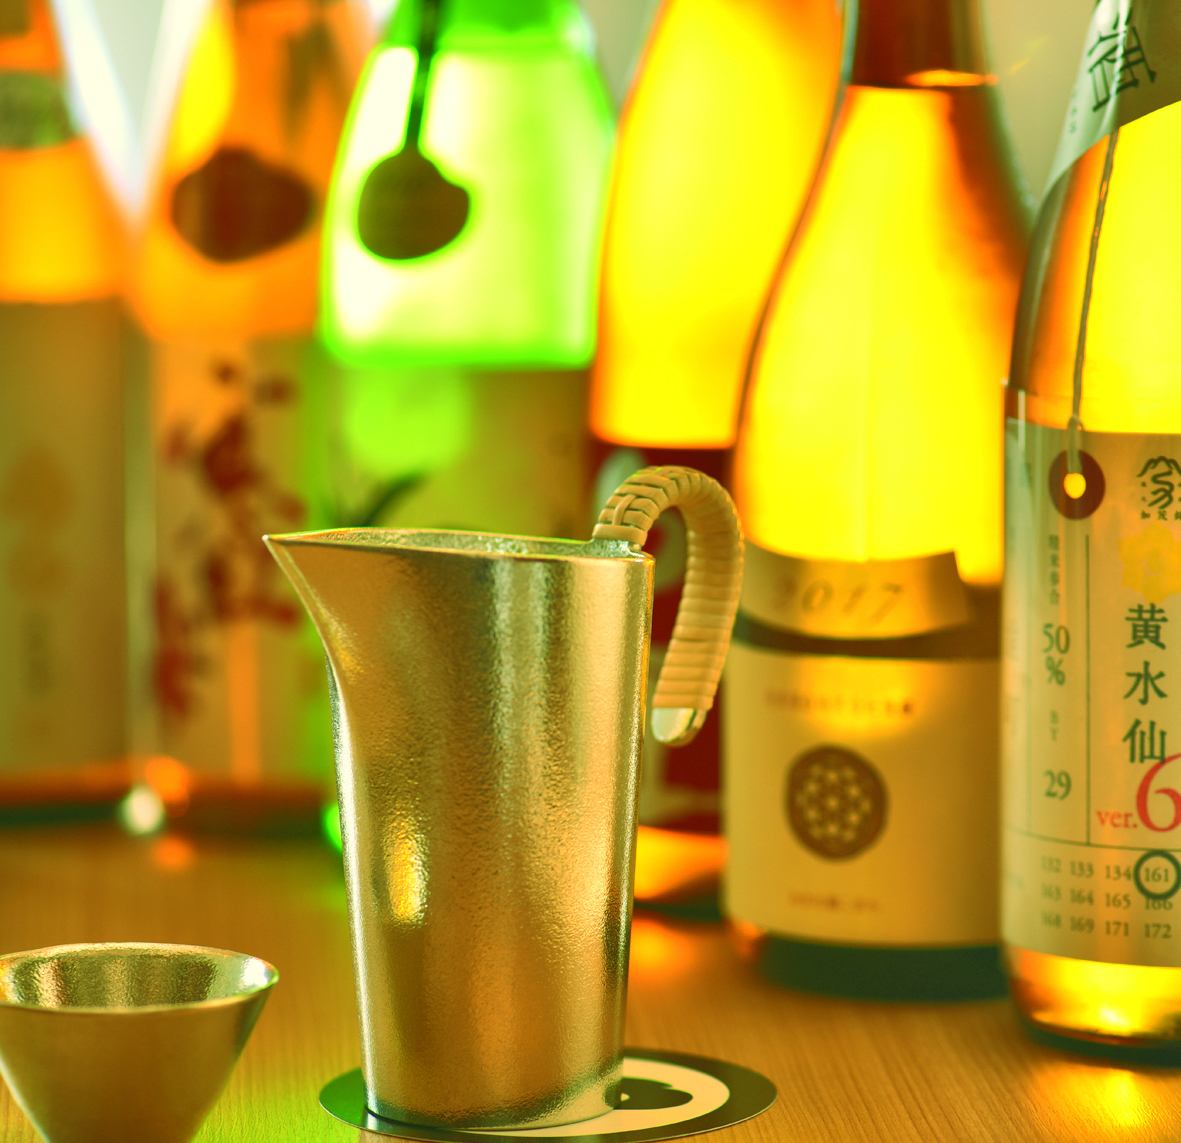 We offer a wide variety of carefully selected sake.